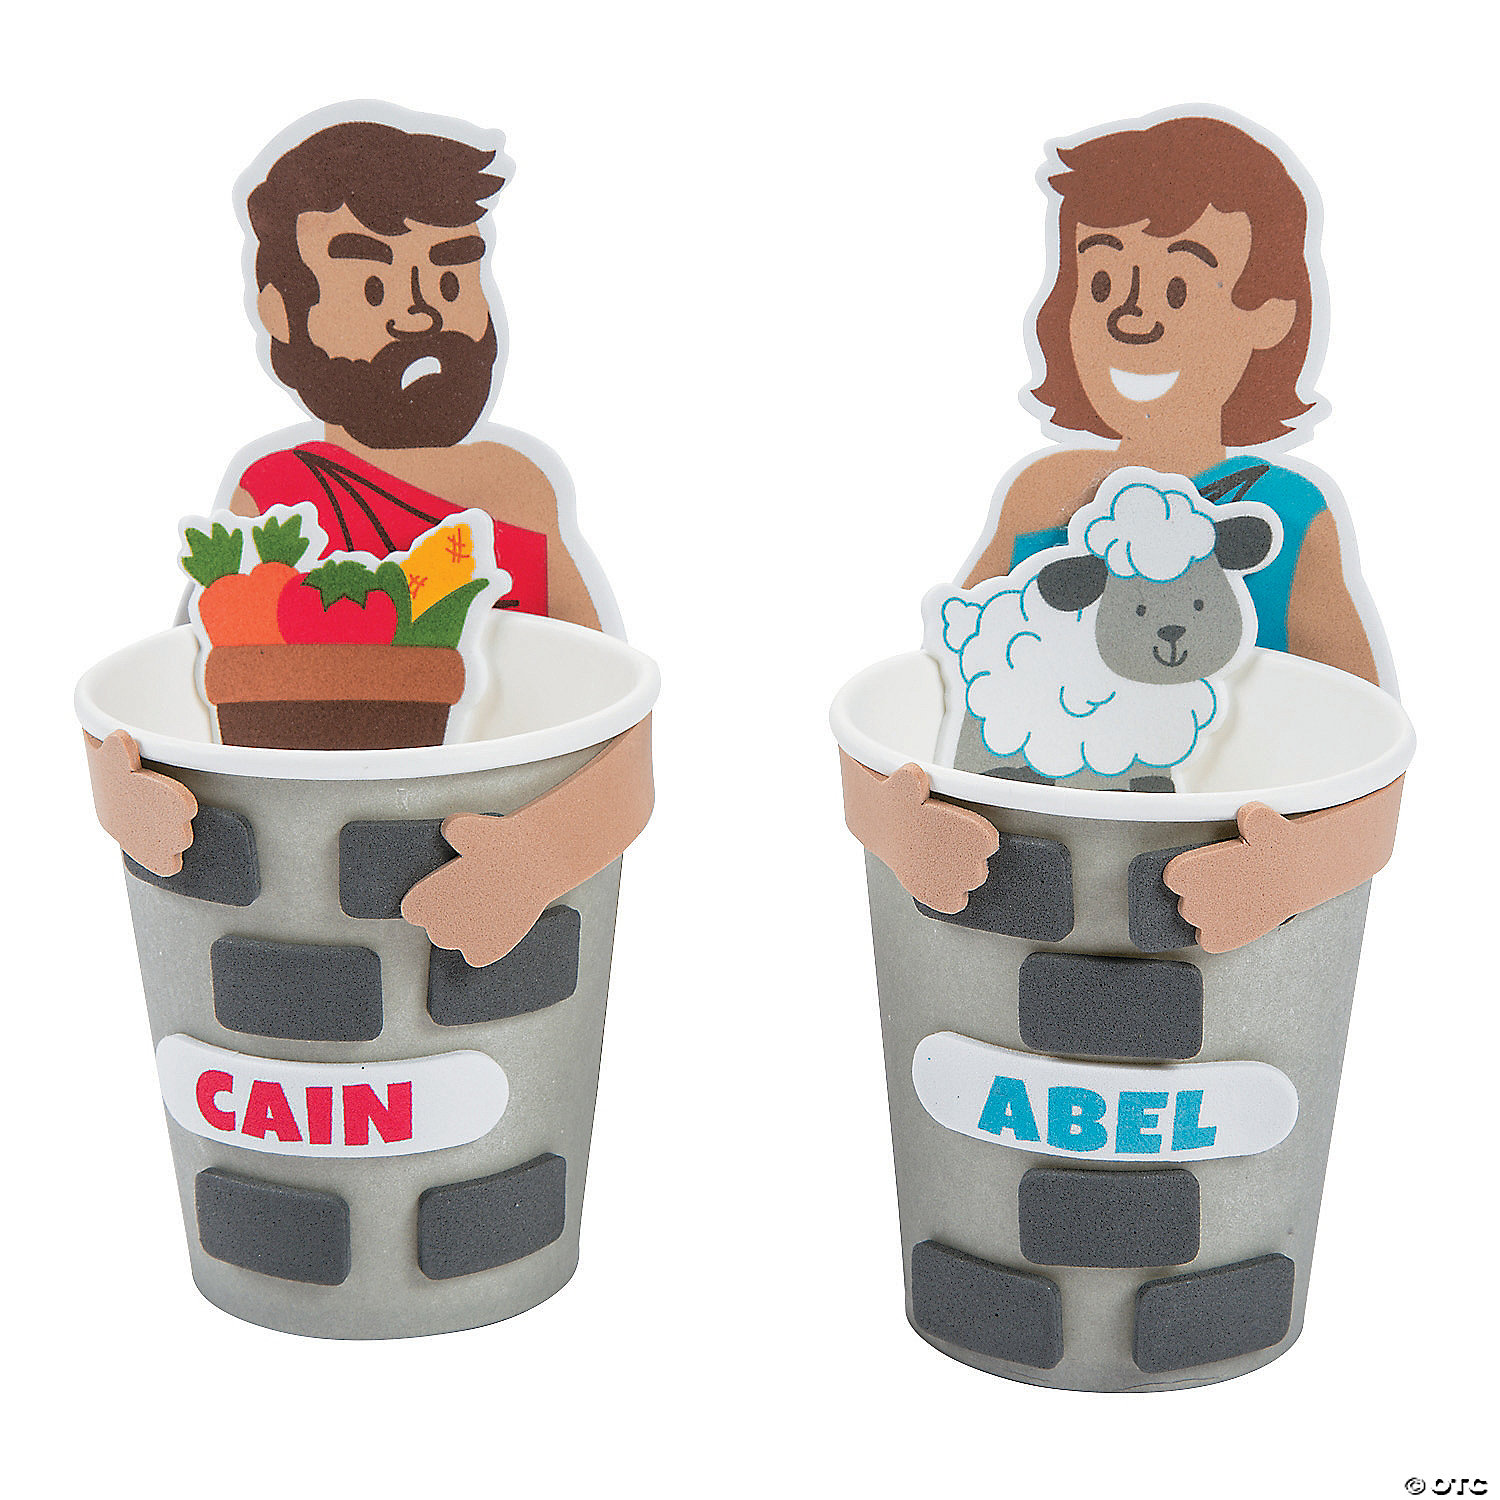 Cain & Abel Treat Cups Craft Kit - Discontinued